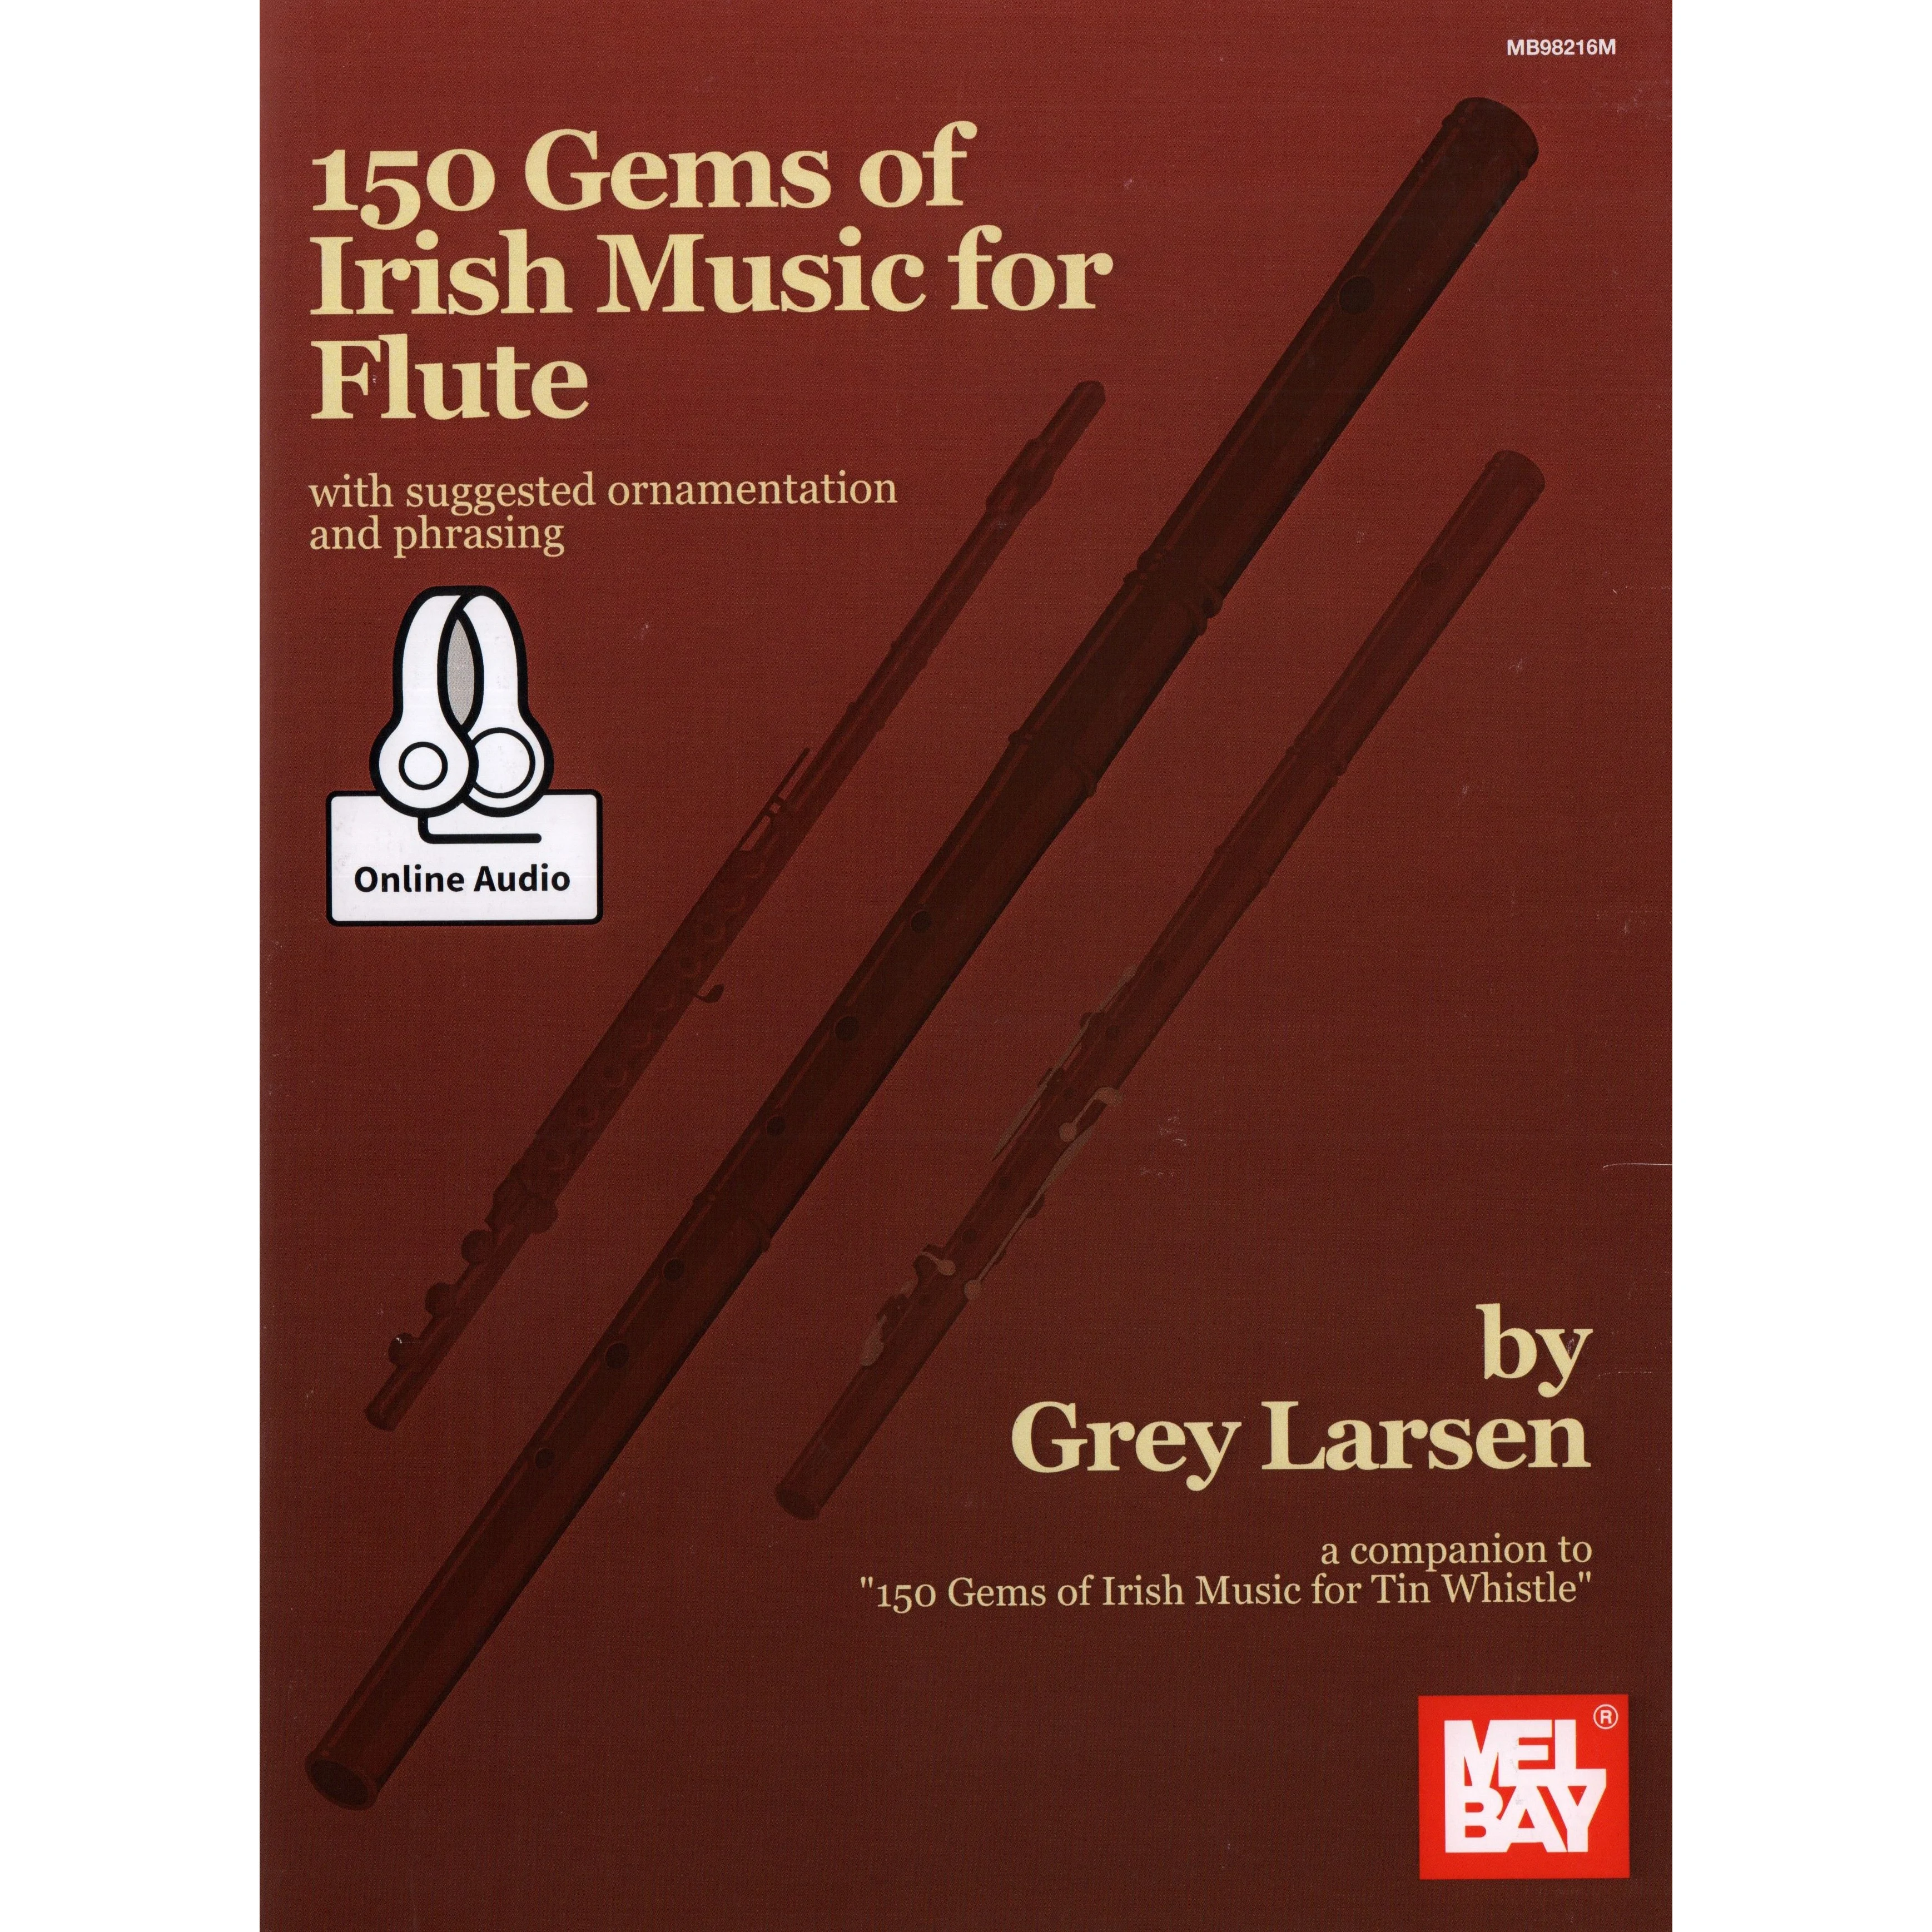 Just　Irish　150　G.　only]　Online　Larsen.　(includes　Audio)　Gems　of　[Score　Flute　Music　for　Flutes